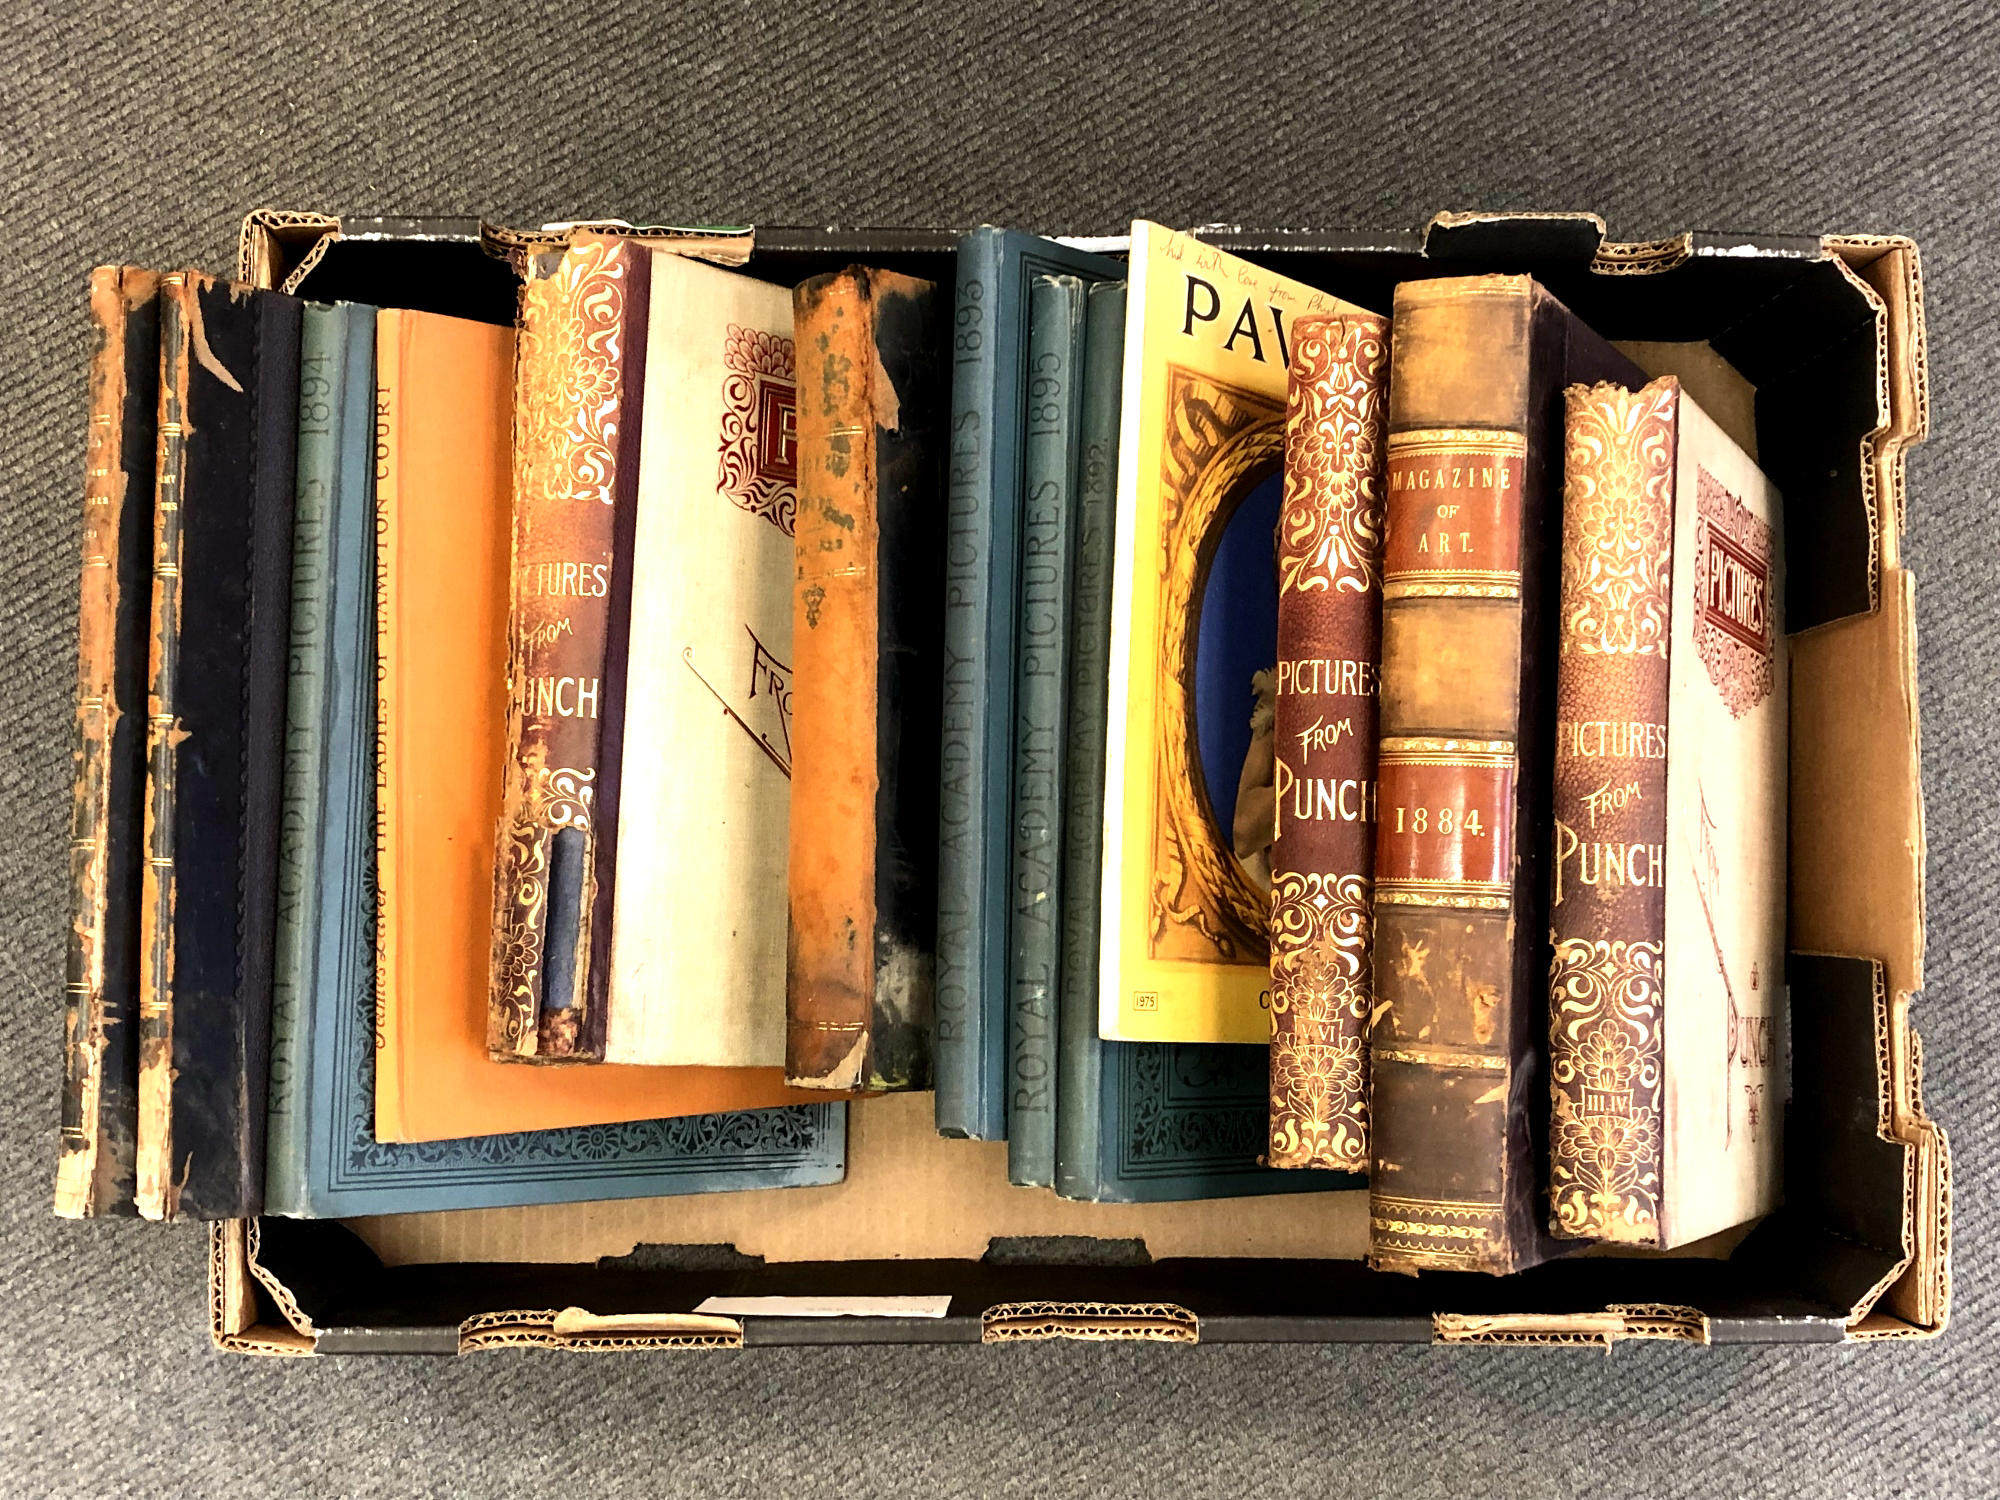 A box of antiquarian volumes including Pictures of the Royal Academy, Pictures from Punch etc.